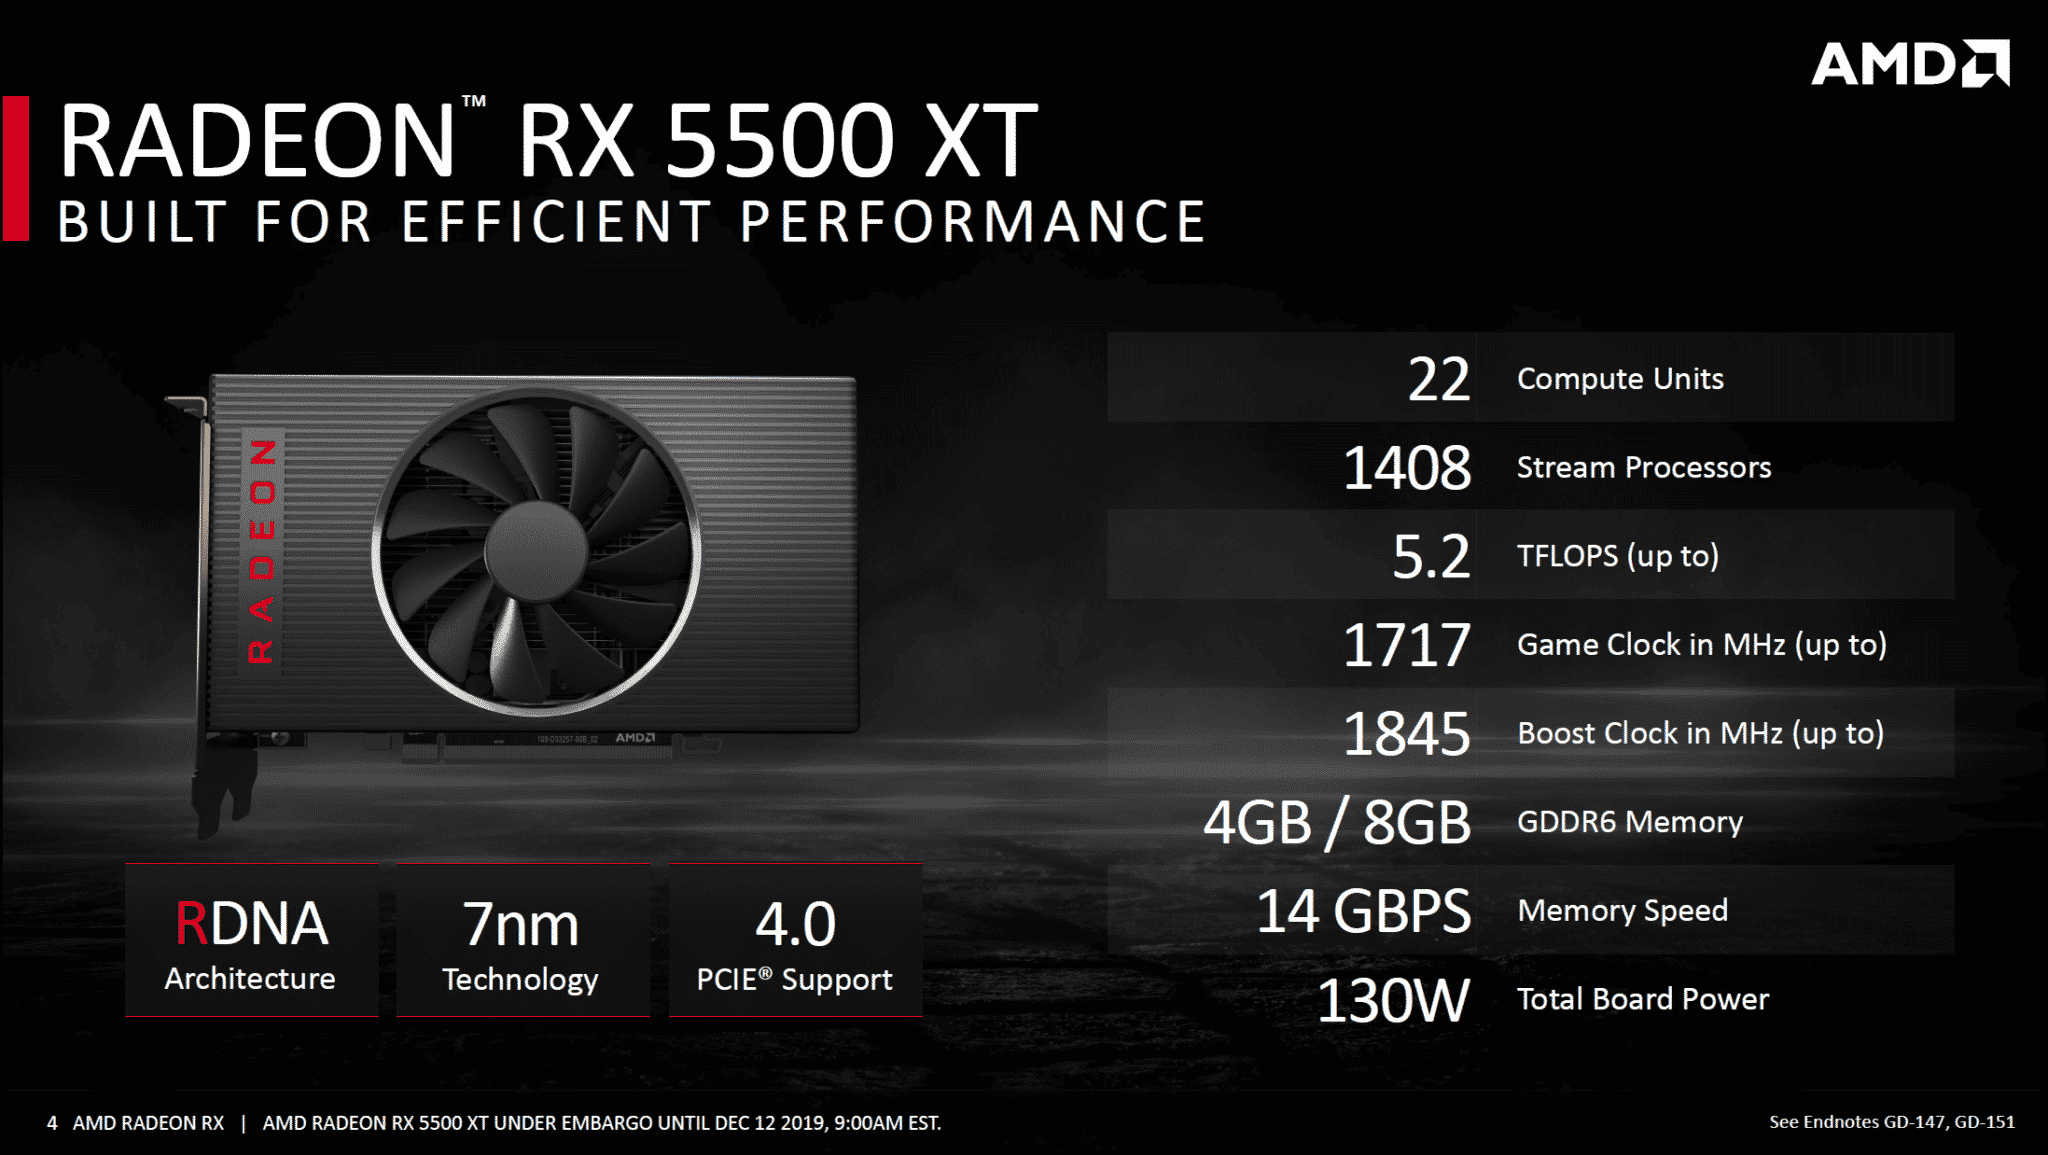 SAPPHIRE PULSE Radeon RX 5500 XT 4G OC Review - Page 2 of 15